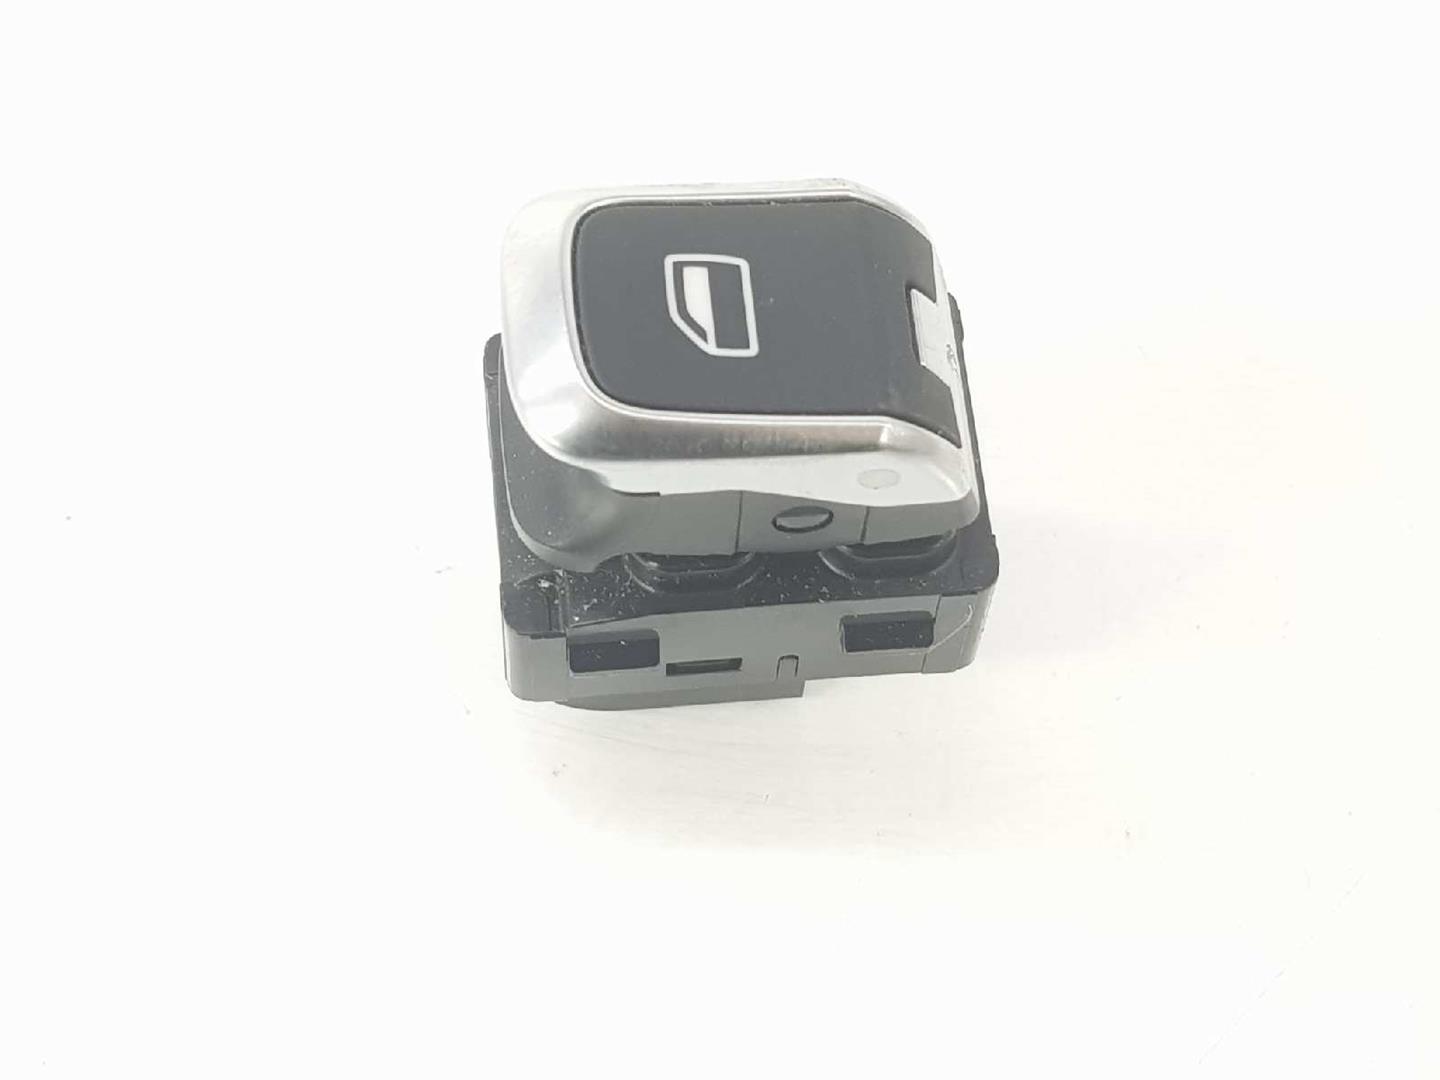 AUDI A3 8V (2012-2020) Front Right Door Window Switch 8V0959855A, 8V0959855A, 1606212222DL 19750515